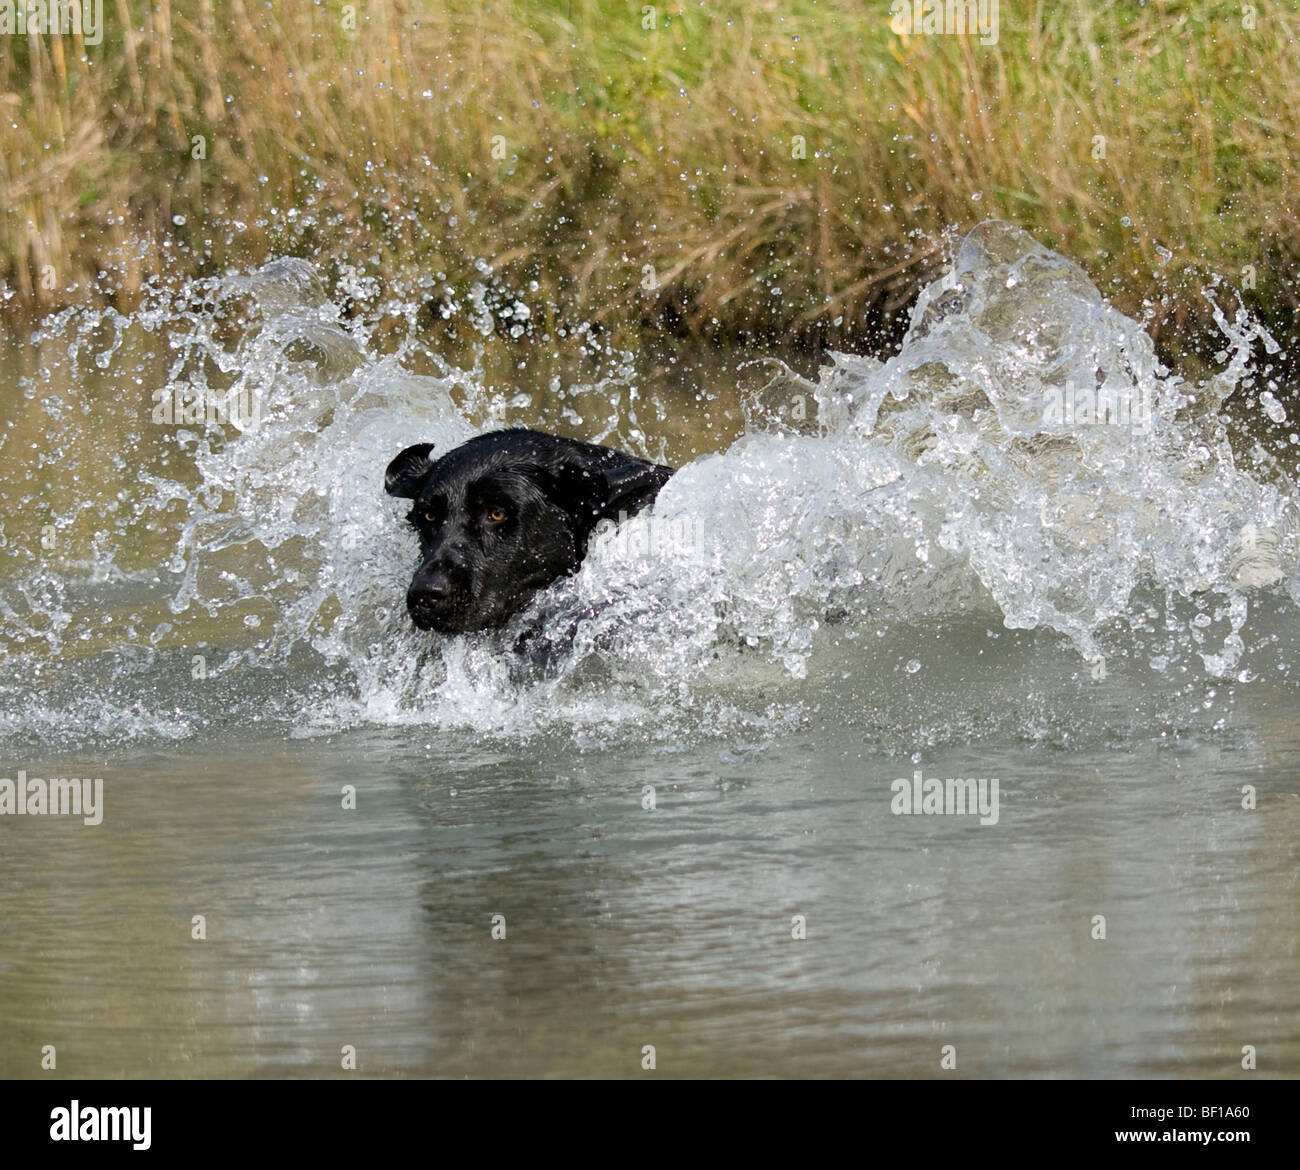 Black Labrador leaping into water to retrieve a duck for the hunter. Stock Photo